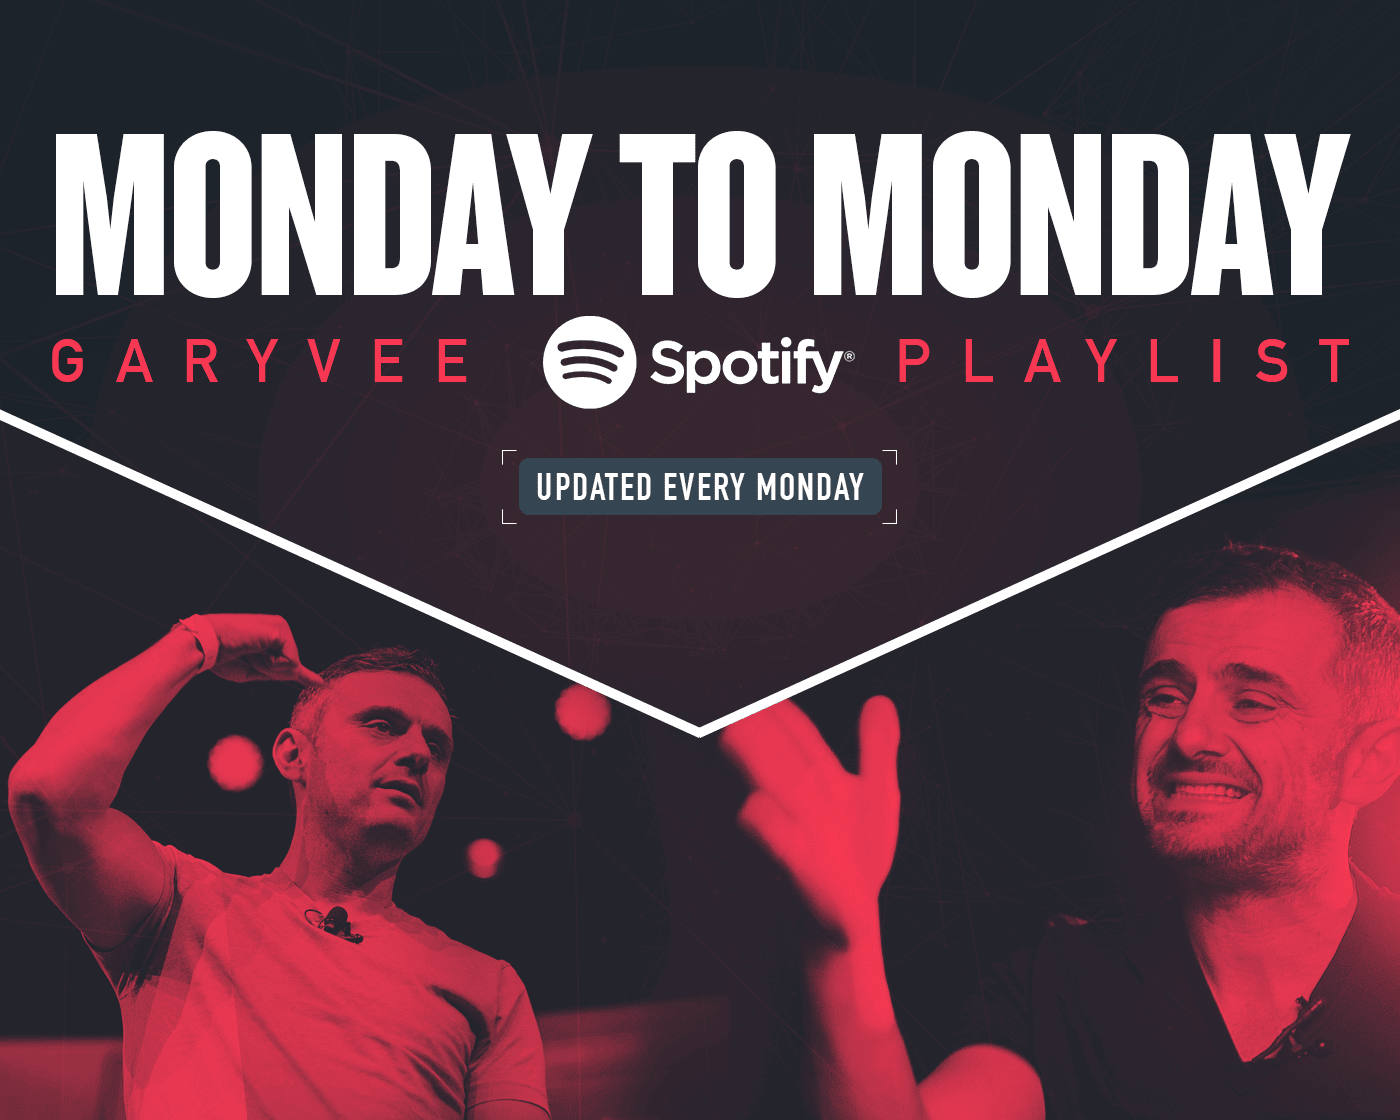 The Best Spotify Playlist to Start Your Week – ‘Monday to Monday’ by GaryVee